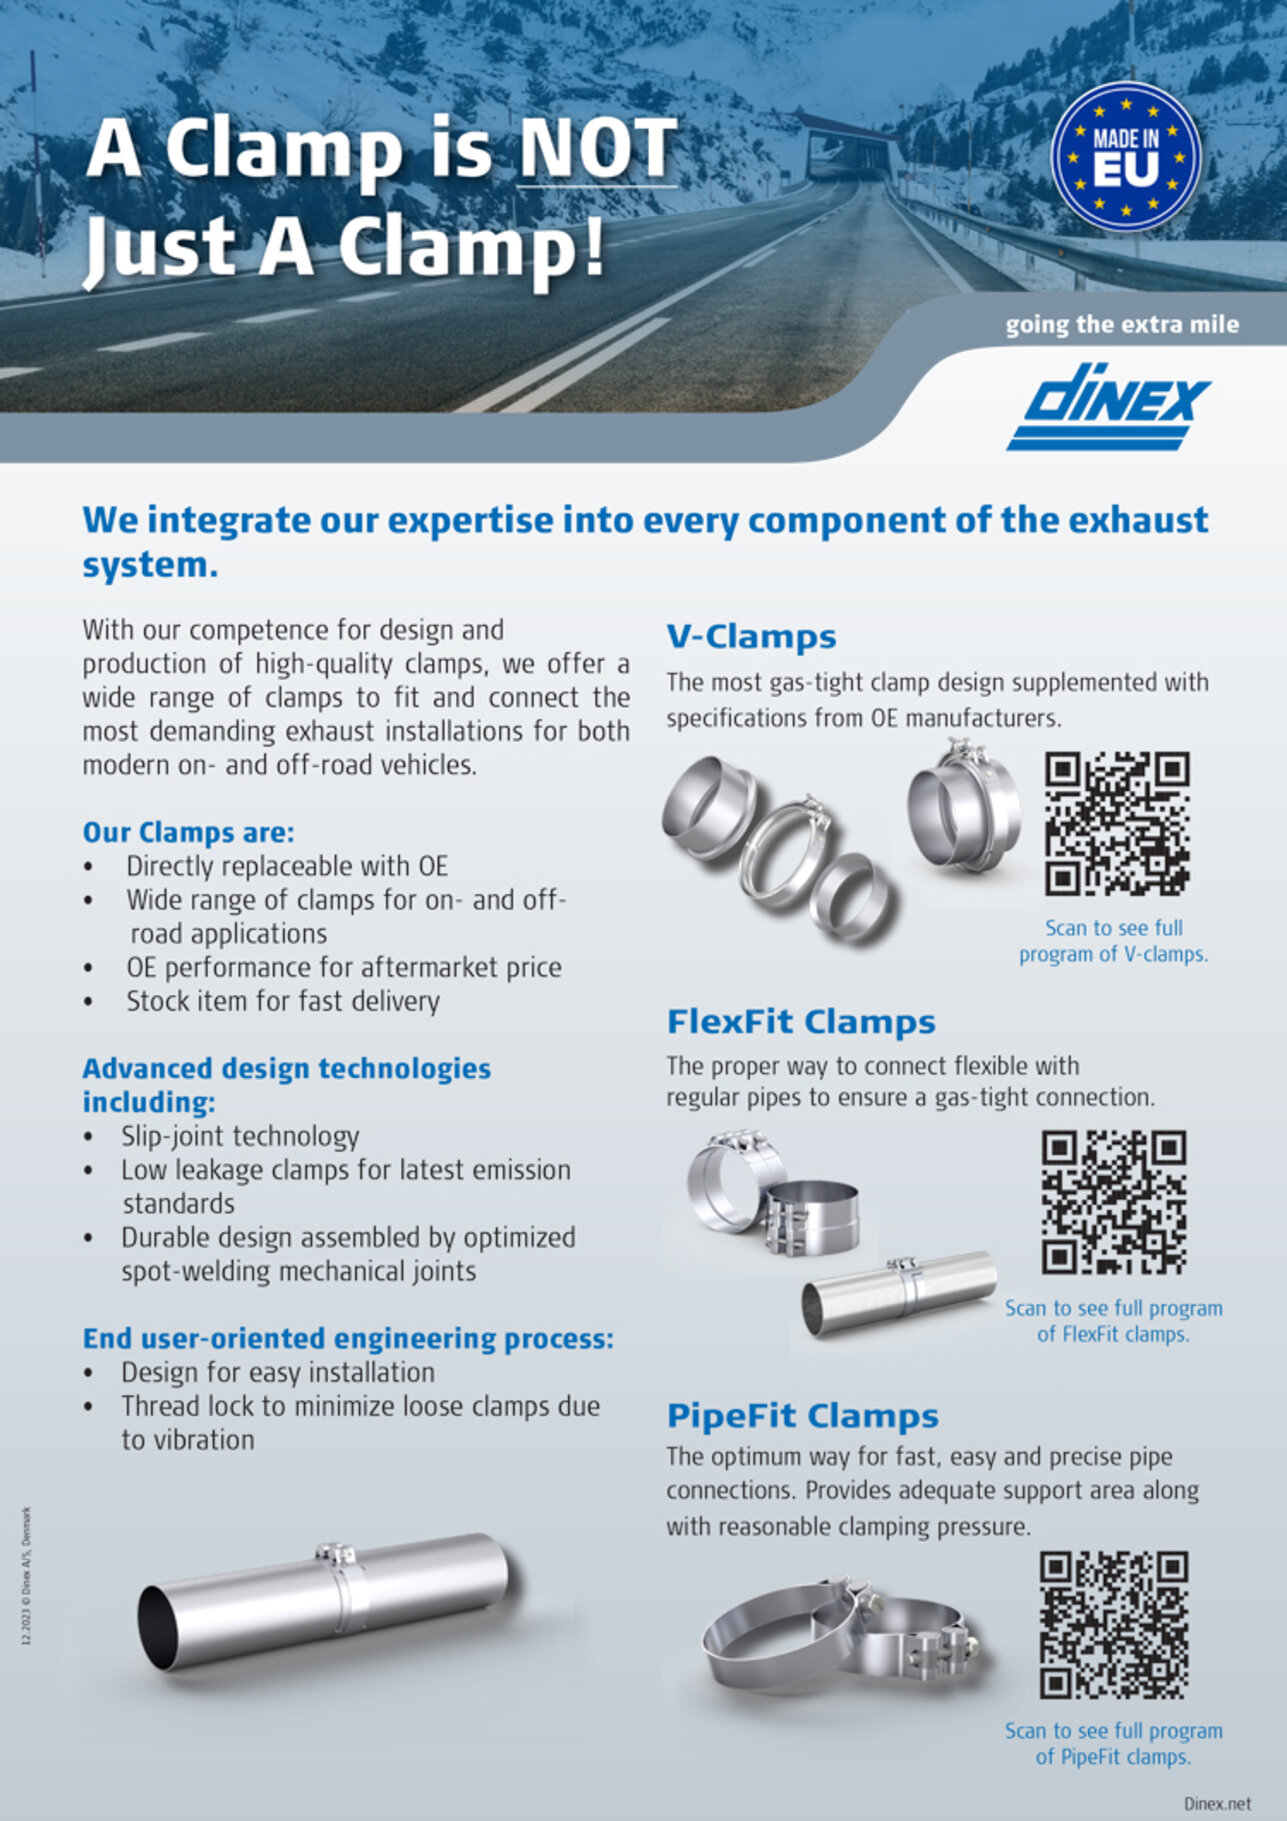 A Dinex Clamp is NOT just A Clamp! 